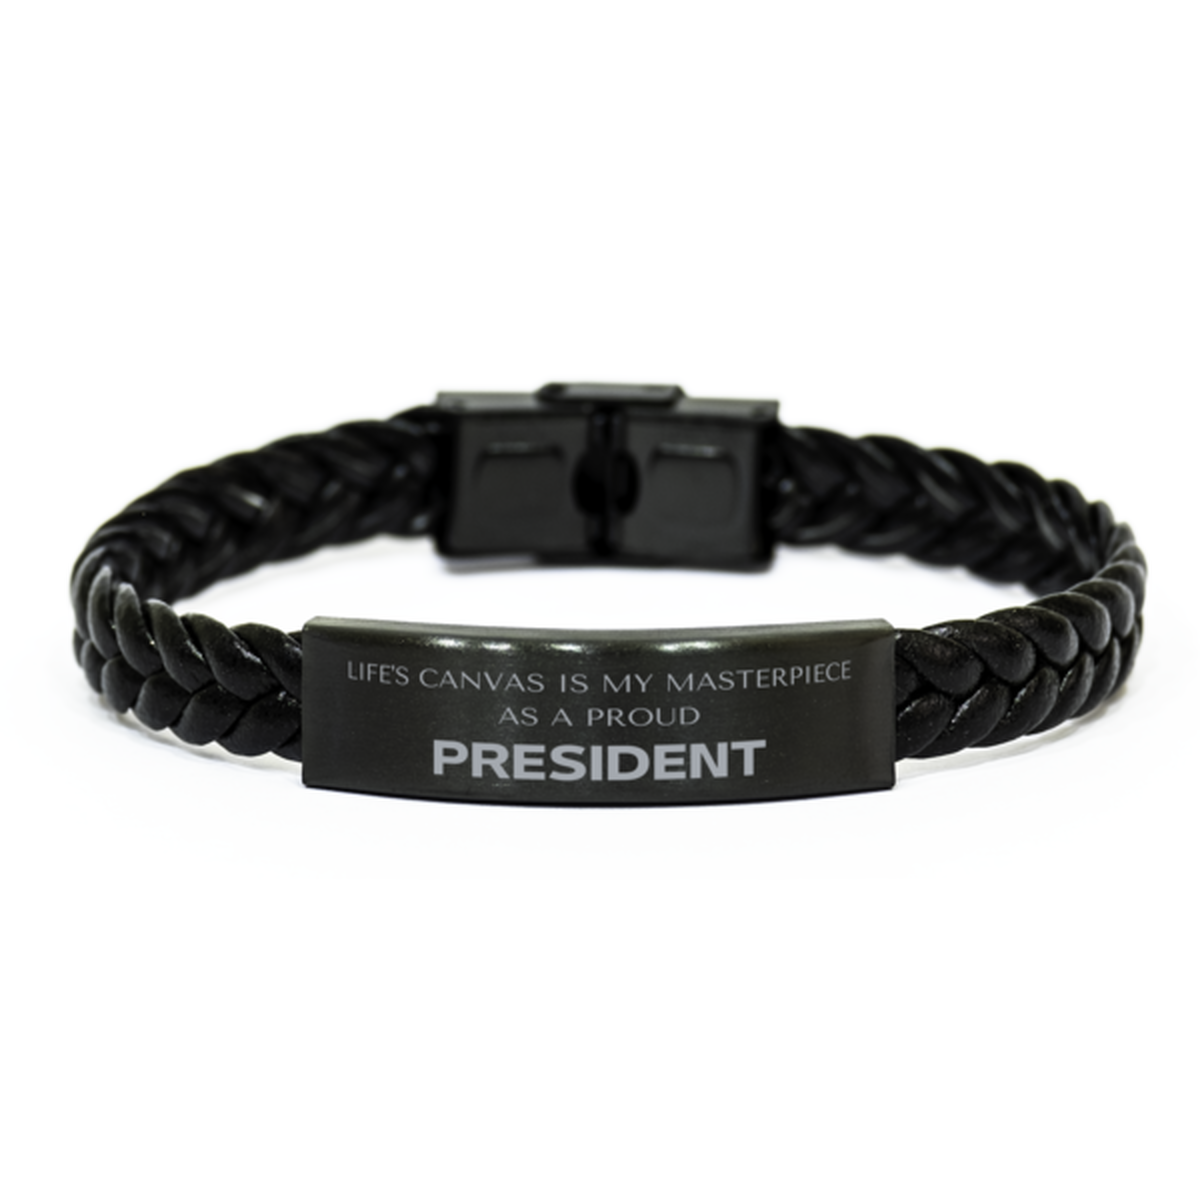 Proud President Gifts, Life's canvas is my masterpiece, Epic Birthday Christmas Unique Braided Leather Bracelet For President, Coworkers, Men, Women, Friends